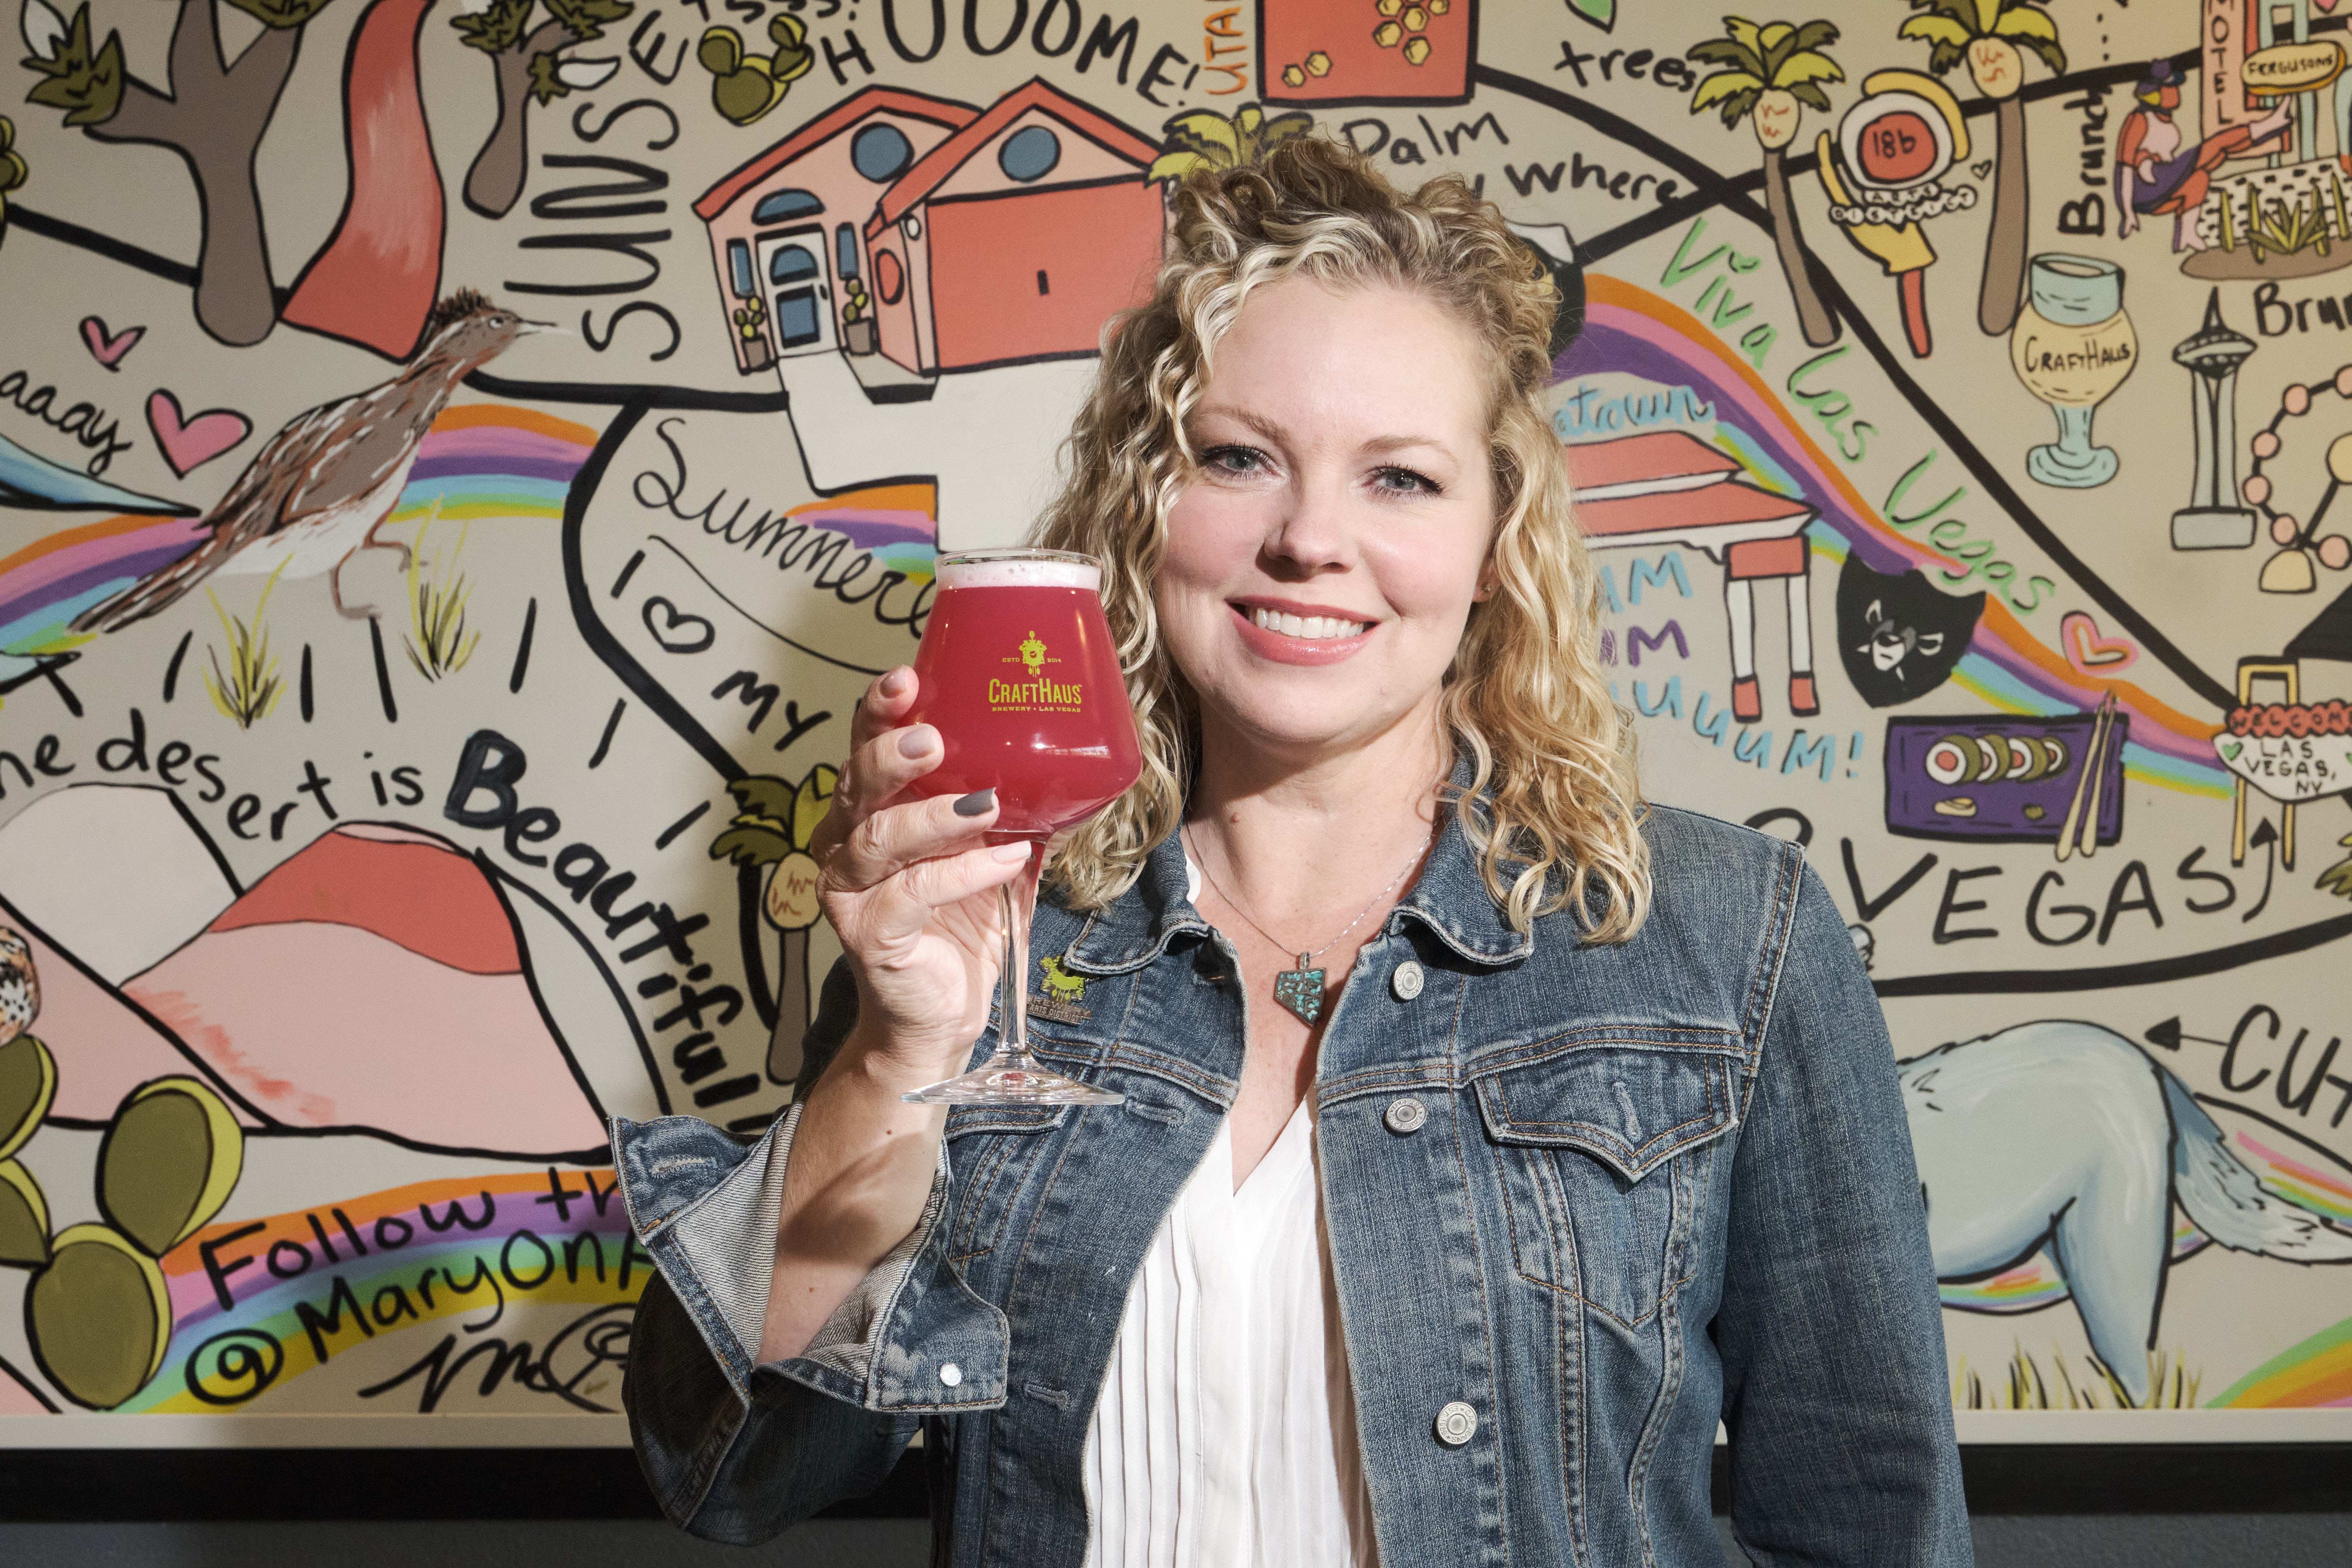 A woman stands in front of a mural holding a beer